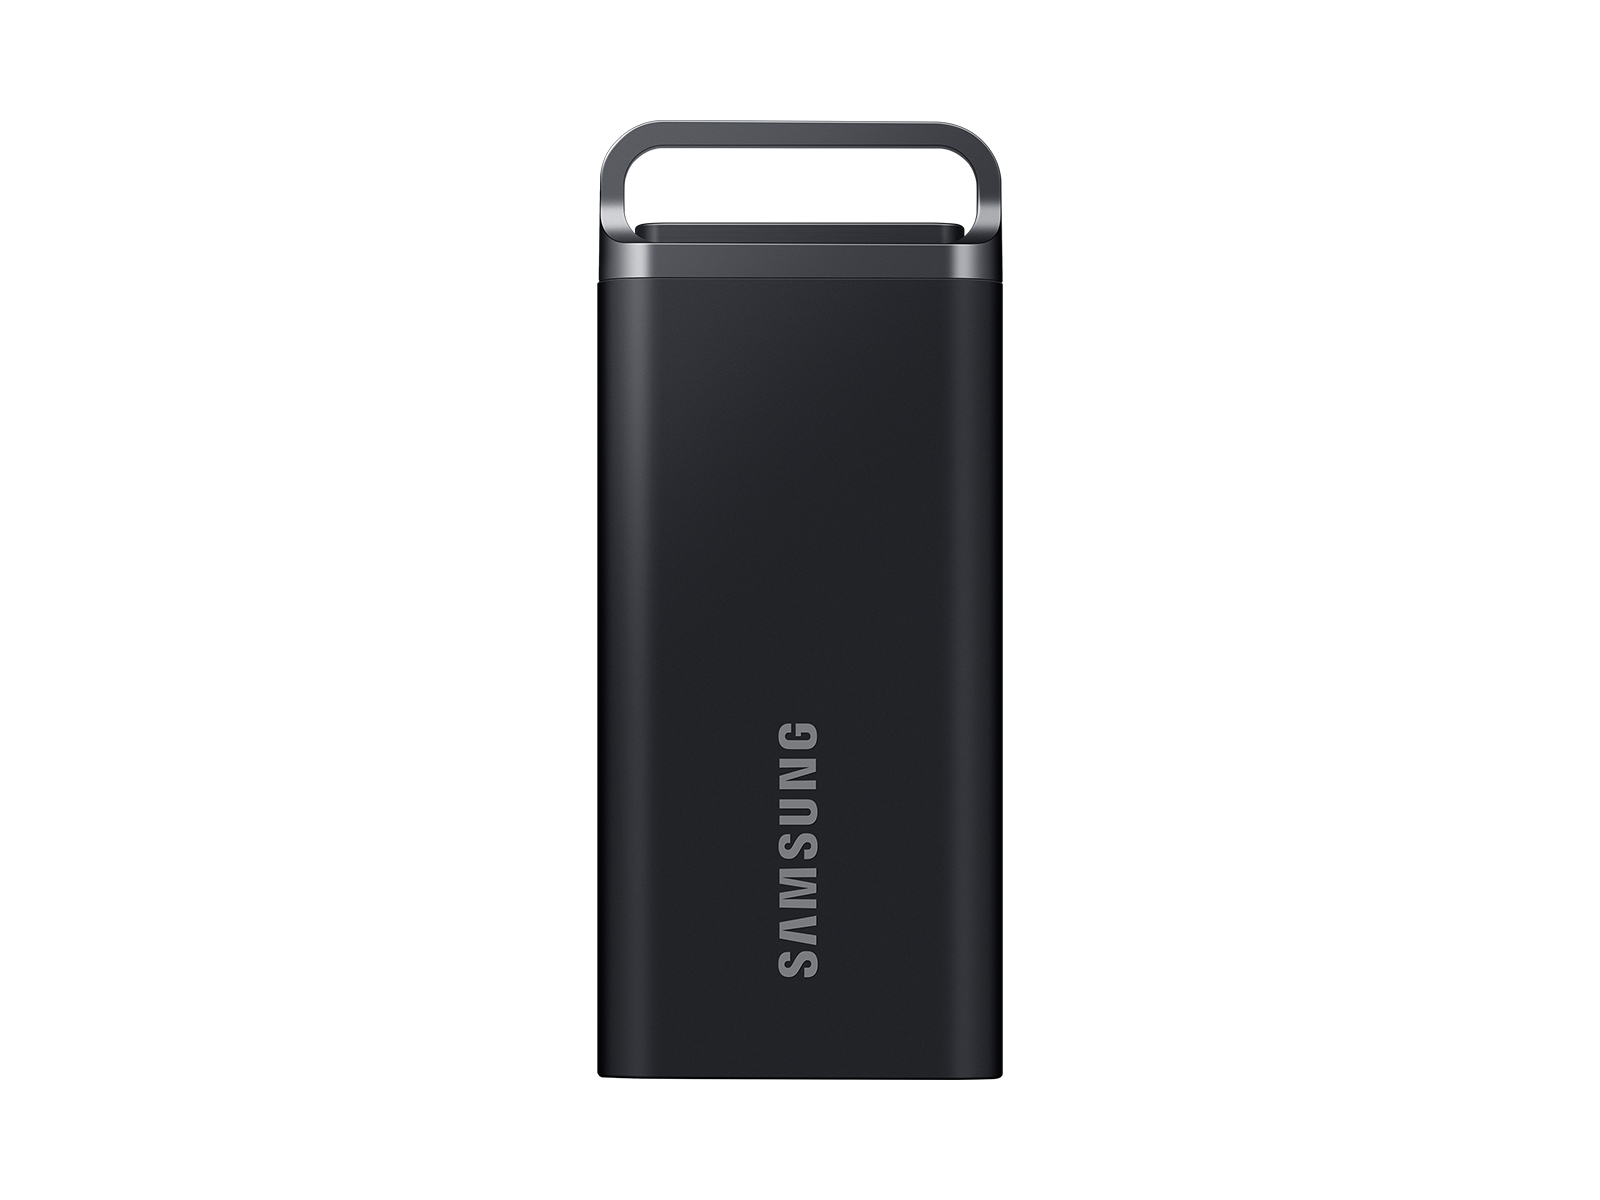 SamsungUS/home/computing/memory-storage/portable-solid-state-drives/10-31-2023/gallery-images/MU-PH8T0S-WW_001_Front_Black.jpg